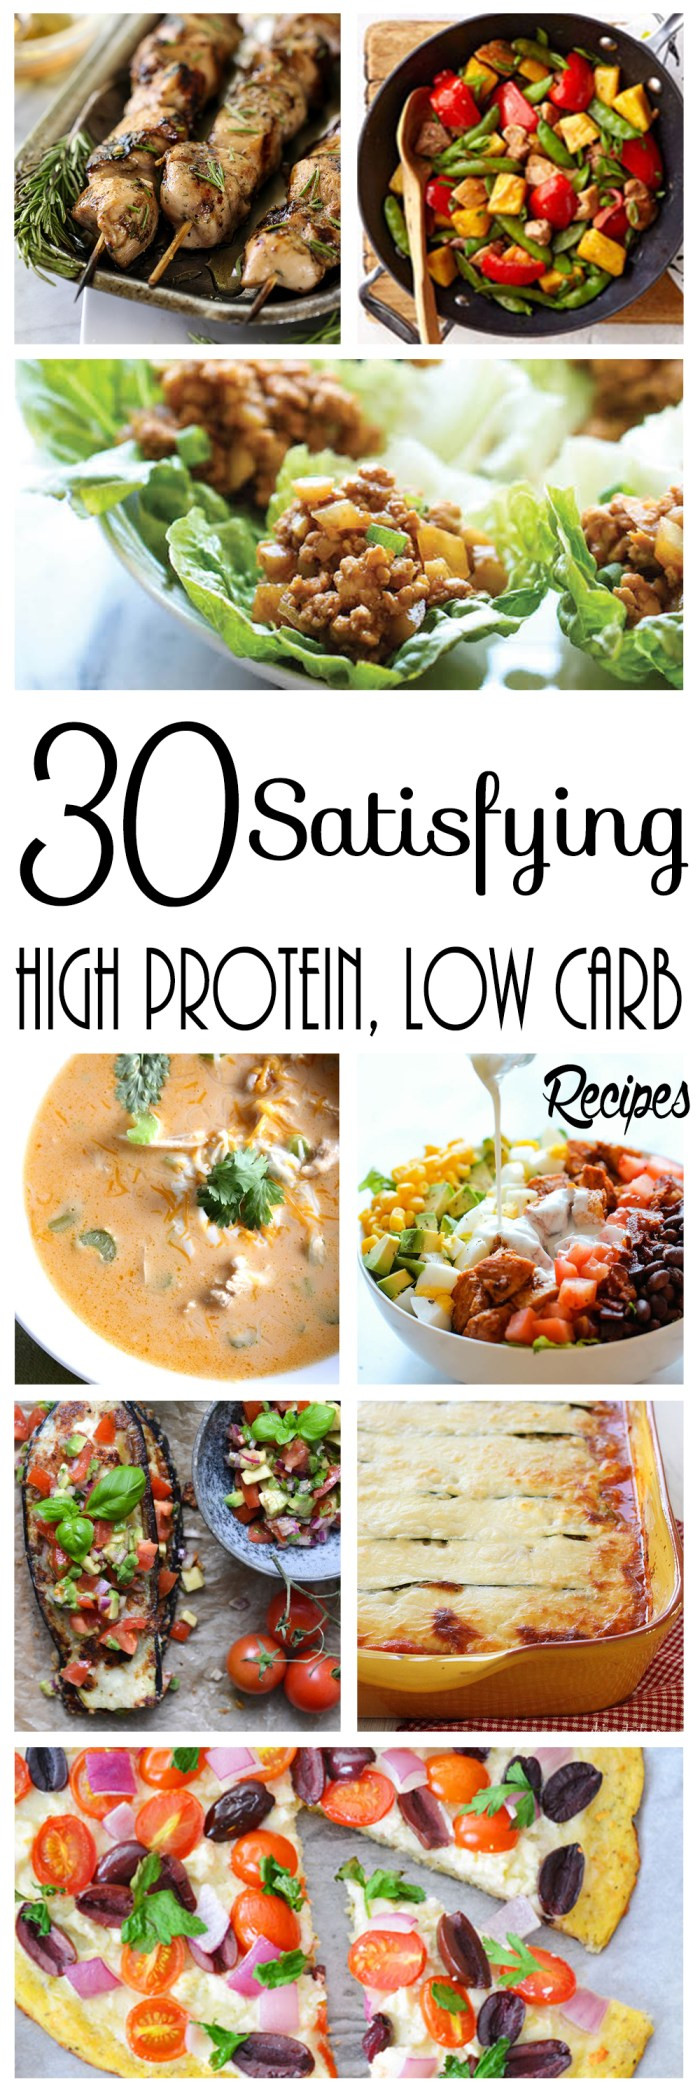 Low Fat High Protein Recipes
 30 Satisfying High Protein Low Carb Recipes P90X